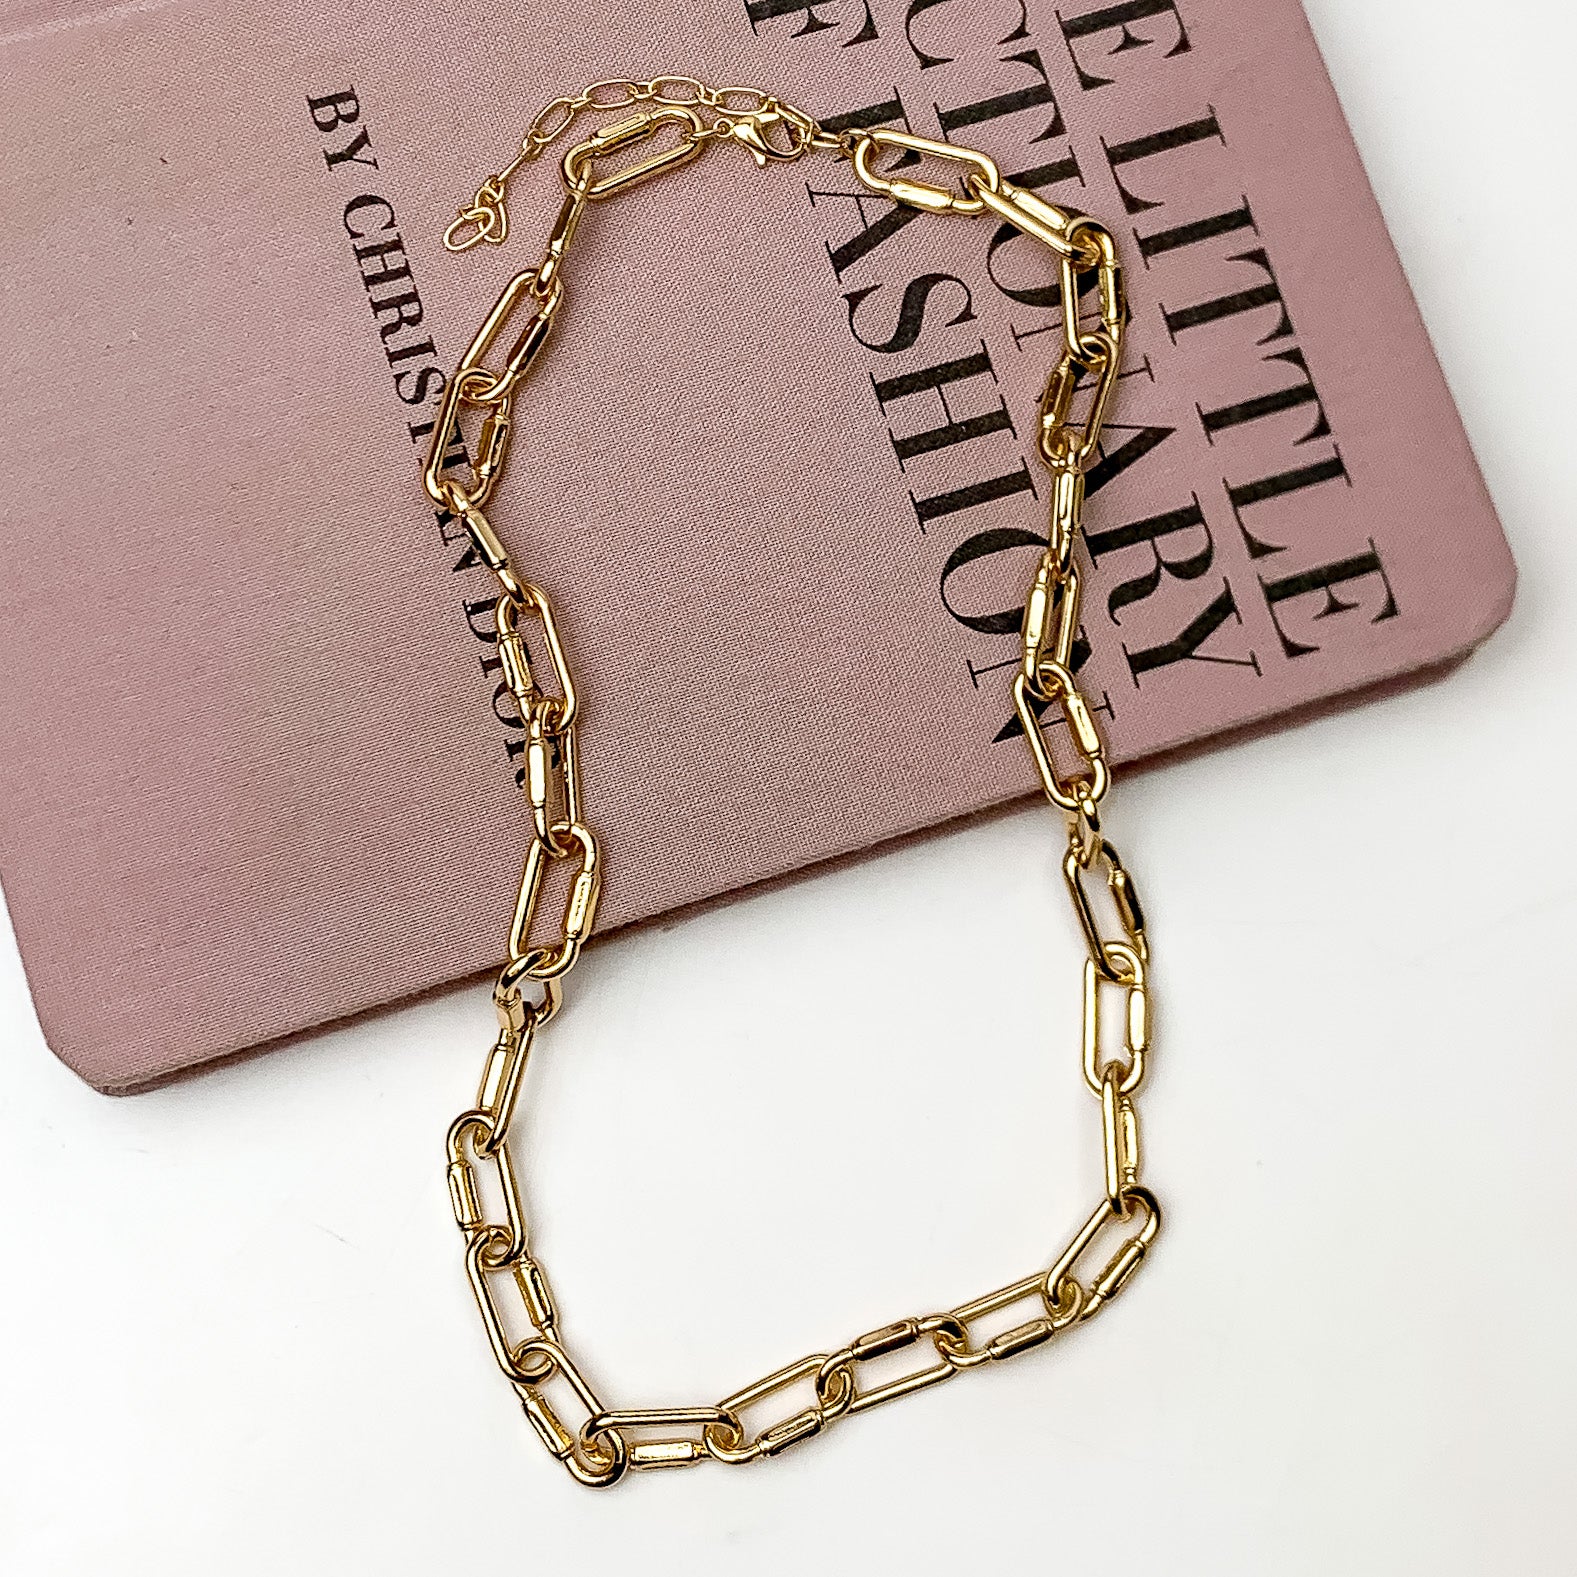 Pictured is a gold chain necklace. This necklace is pictured laying partially on a mauve book on a white background.  